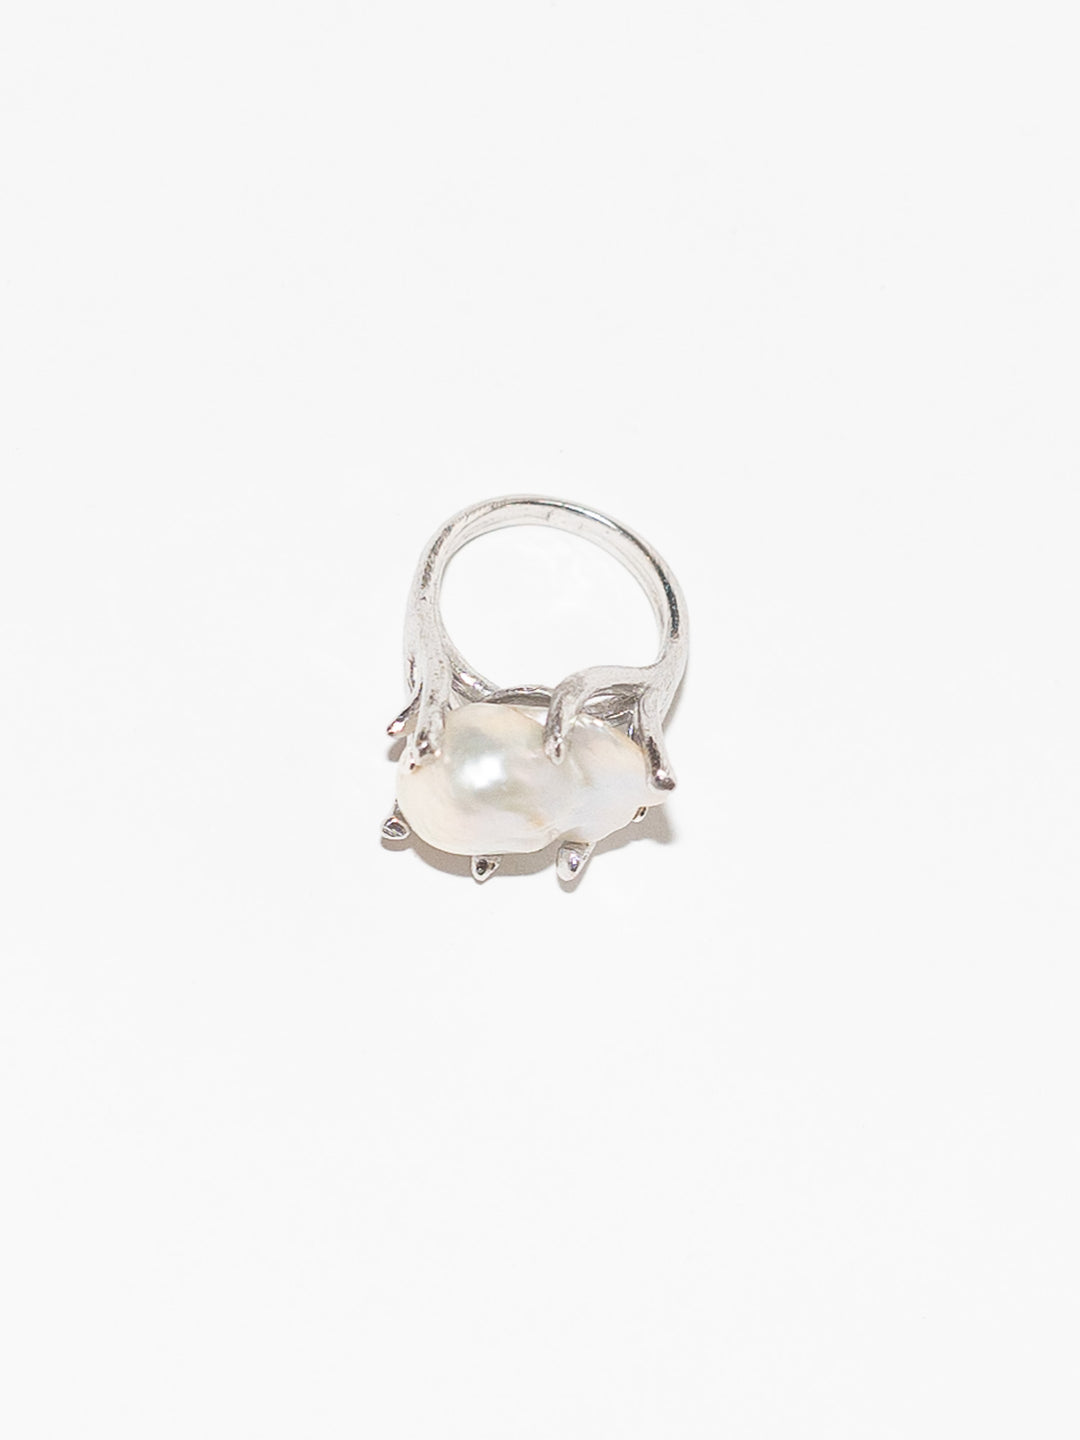 BAROQUE PEARL AND SILVER RING